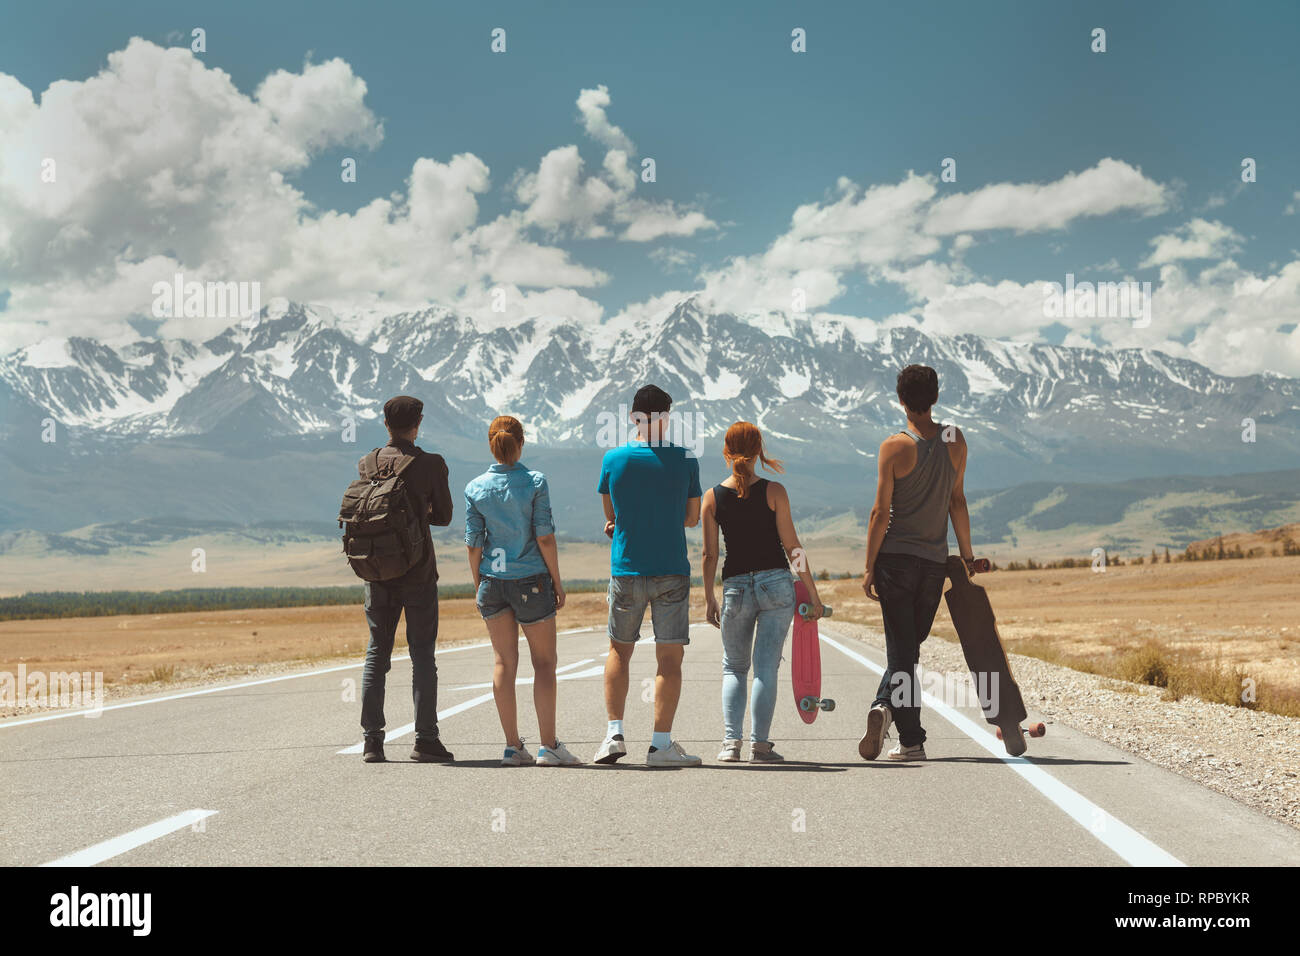 Group of five friends stands on long straight road and looks at mountains. Travel concept Stock Photo